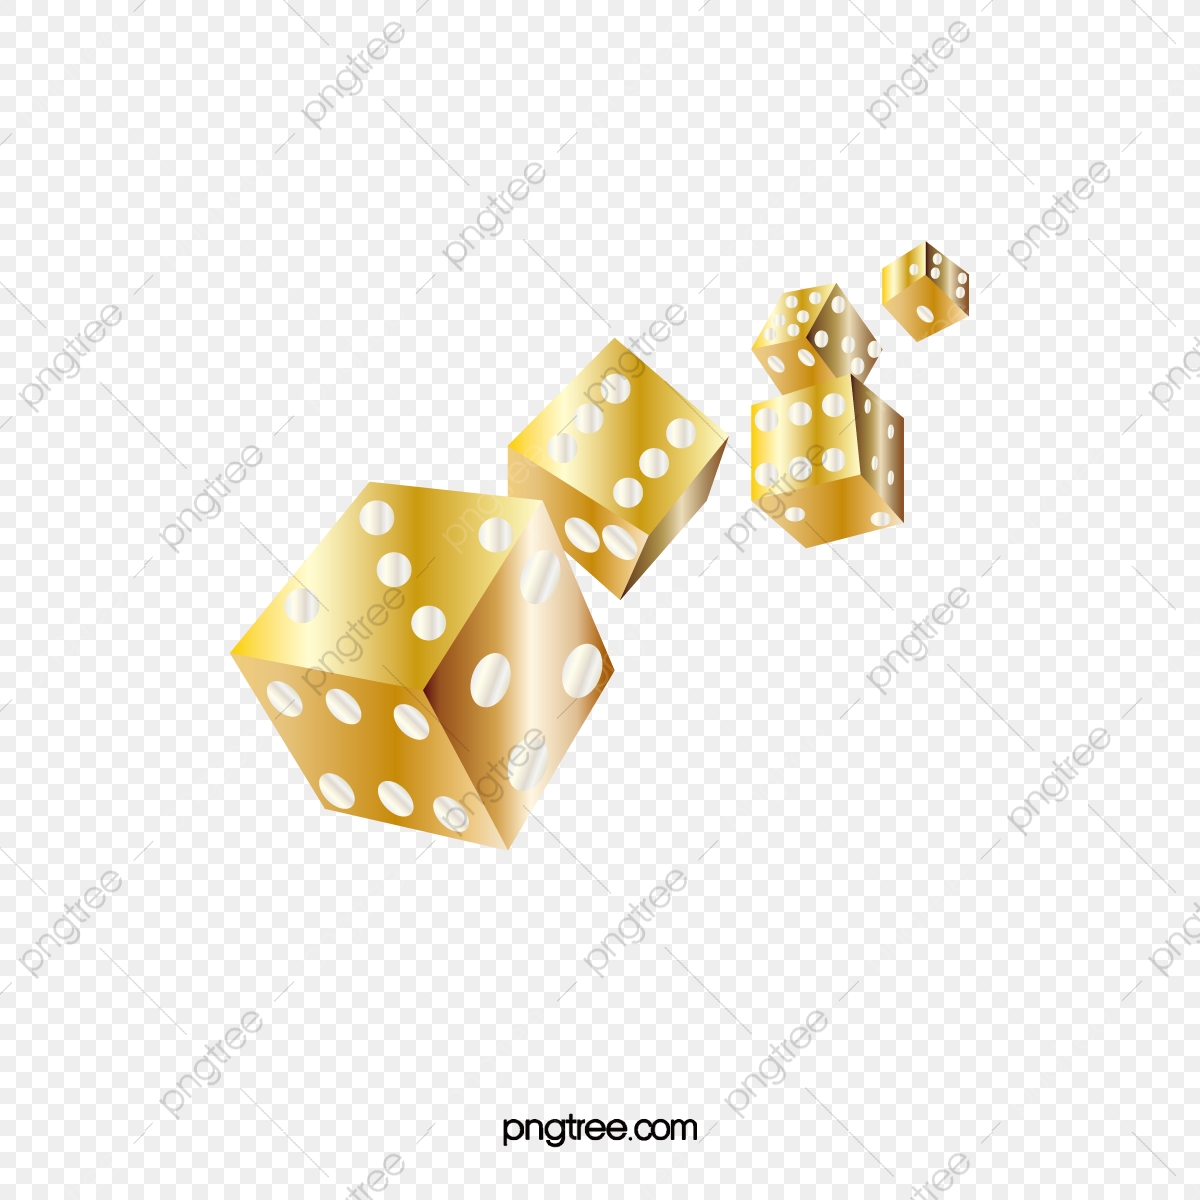 dice clipart gold